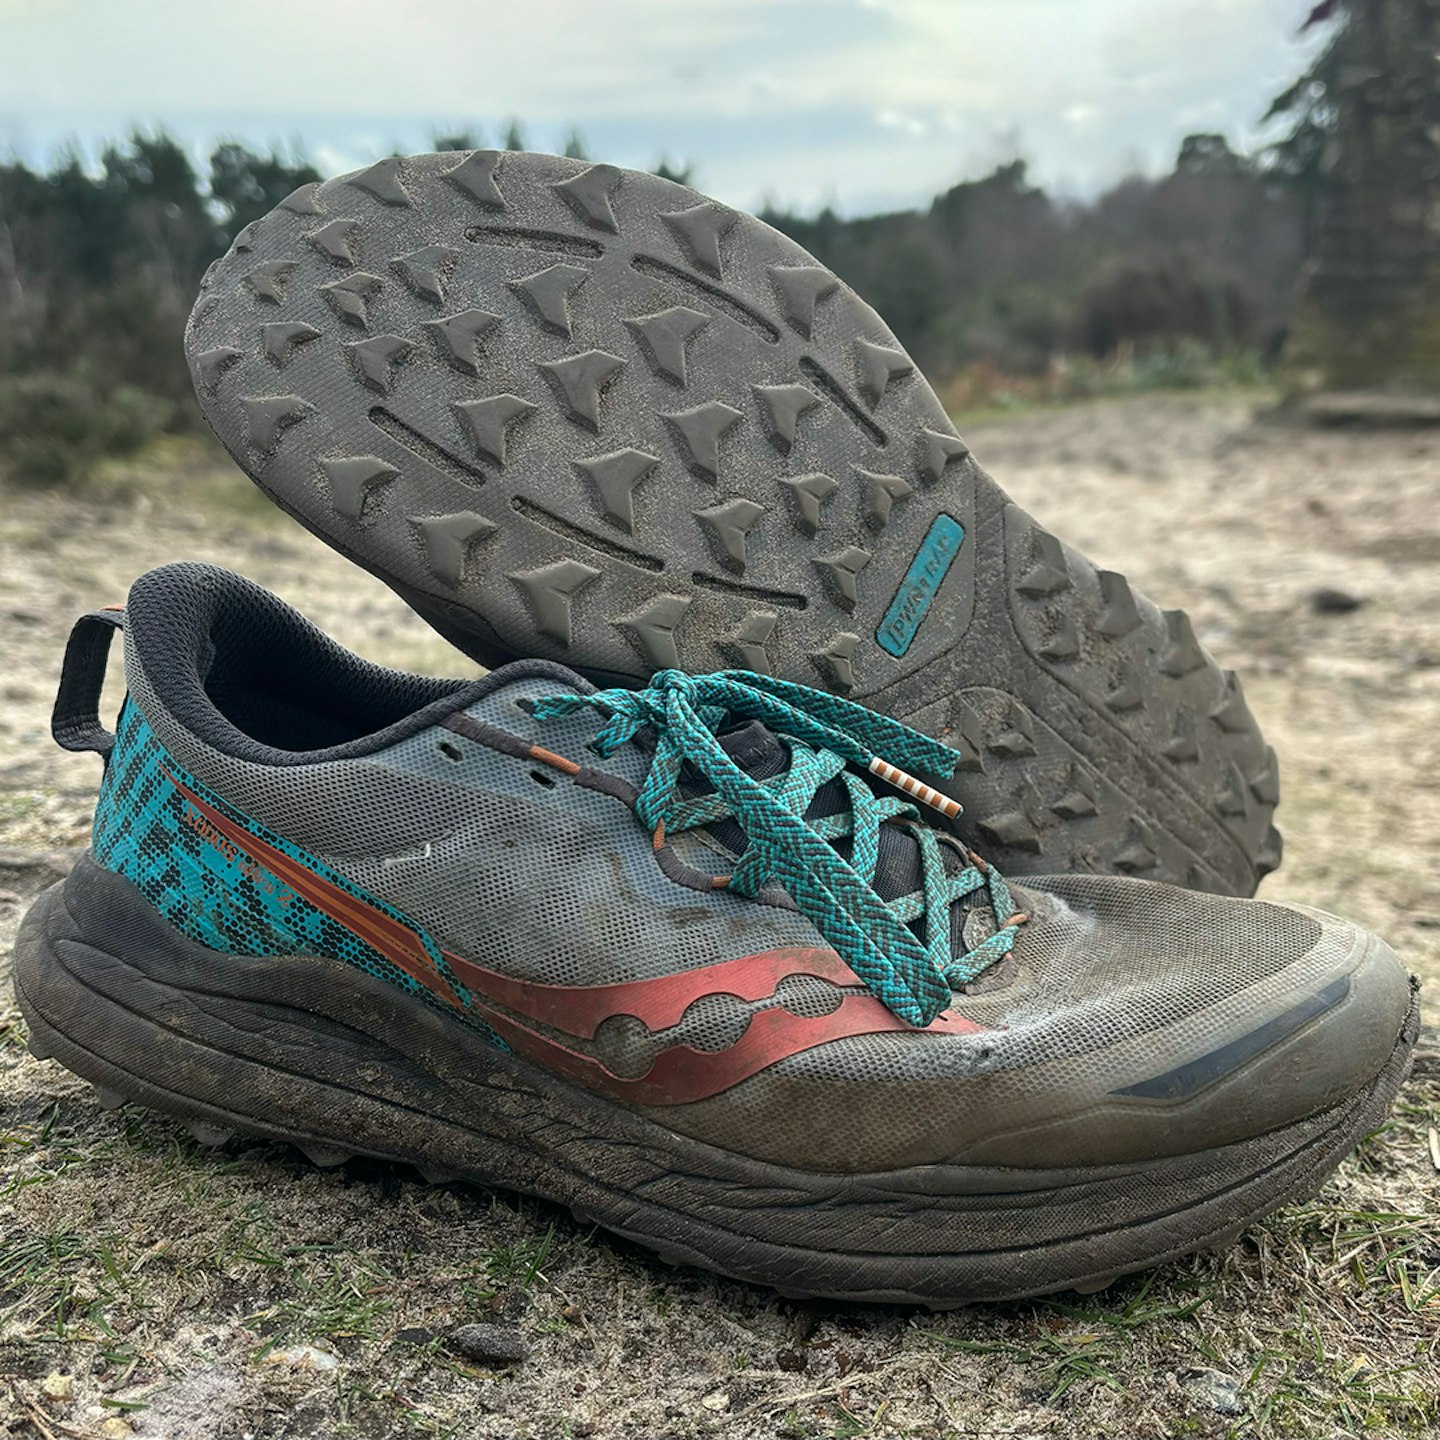 Square product image of the Saucony Xodus ultra 2 trail running shoes